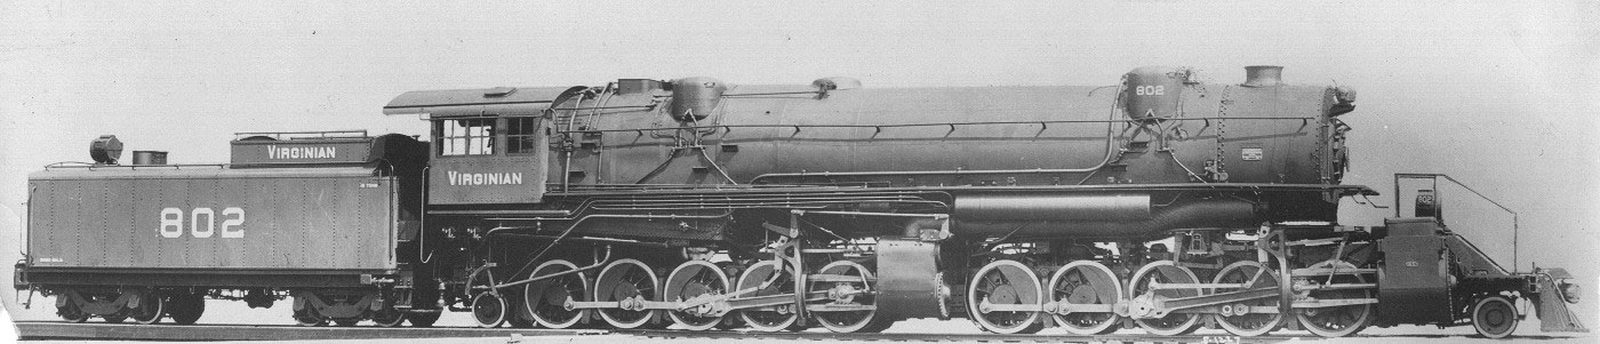 No. 802, the third locomotive, on an ALCO works photo